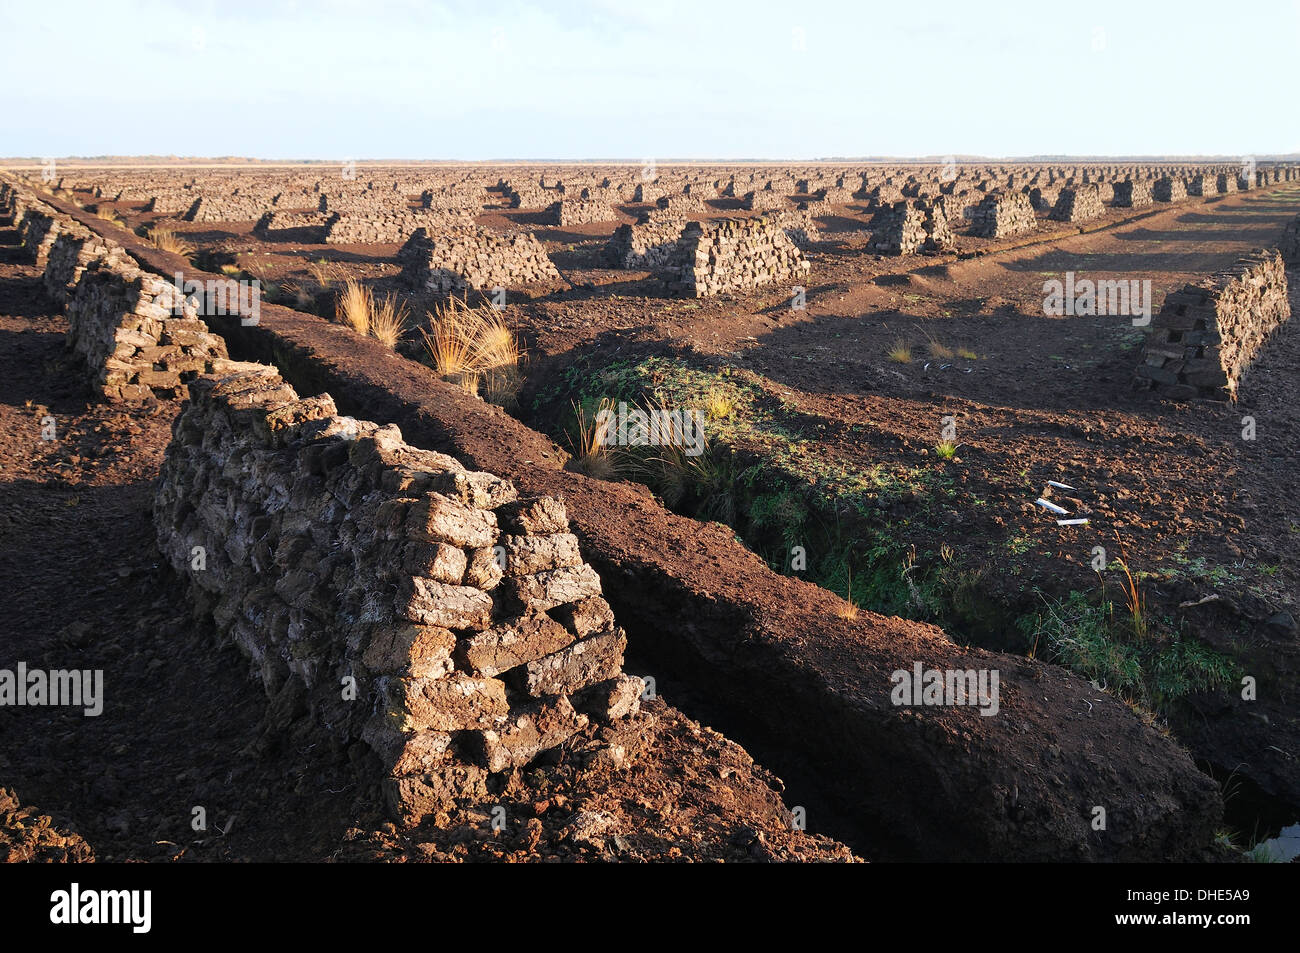 Massed stacks of drying peat turves, mechanically extracted on an industrial scale, Goldenstedt moor, near Vechta, Germany. Stock Photo